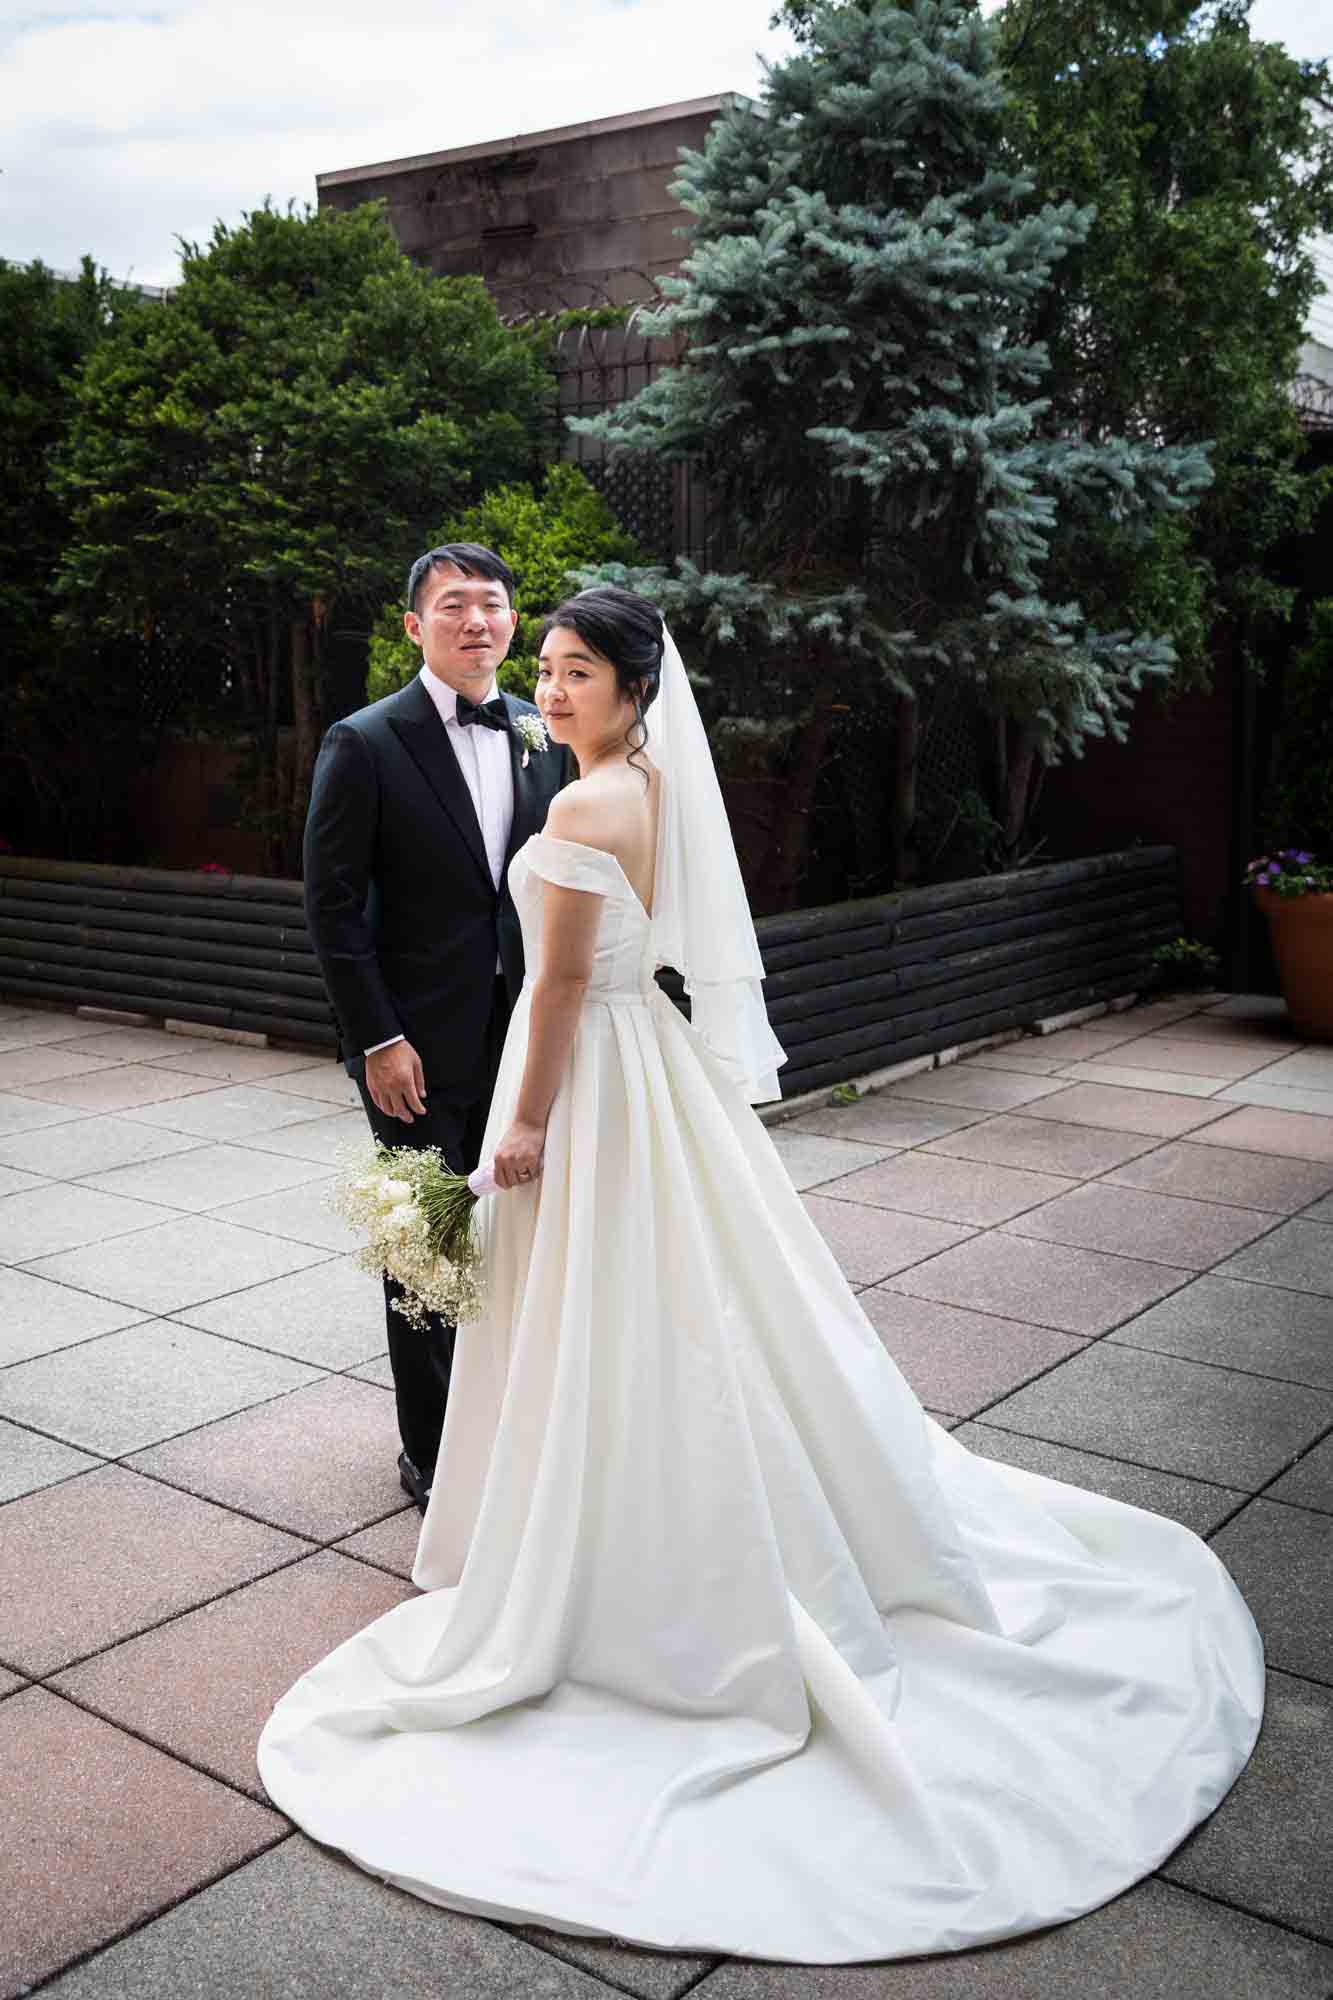 Full length photo of bride and groom standing together on outdoor patio at a Sheraton LaGuardia East Hotel wedding